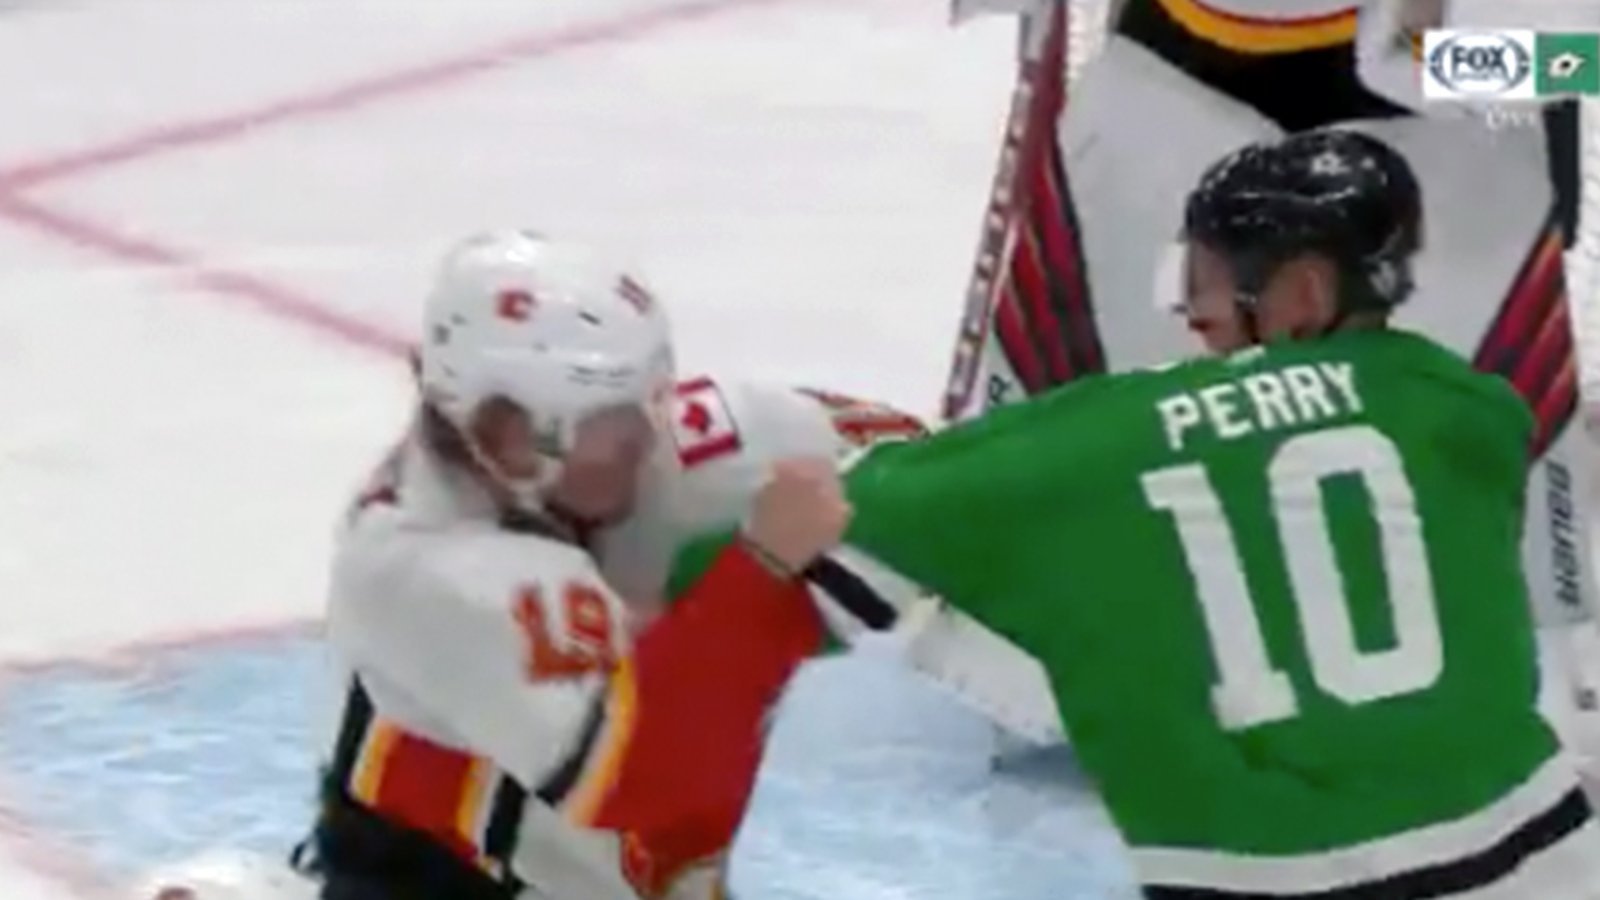 Tkachuk and Perry drop the gloves early in Game 1